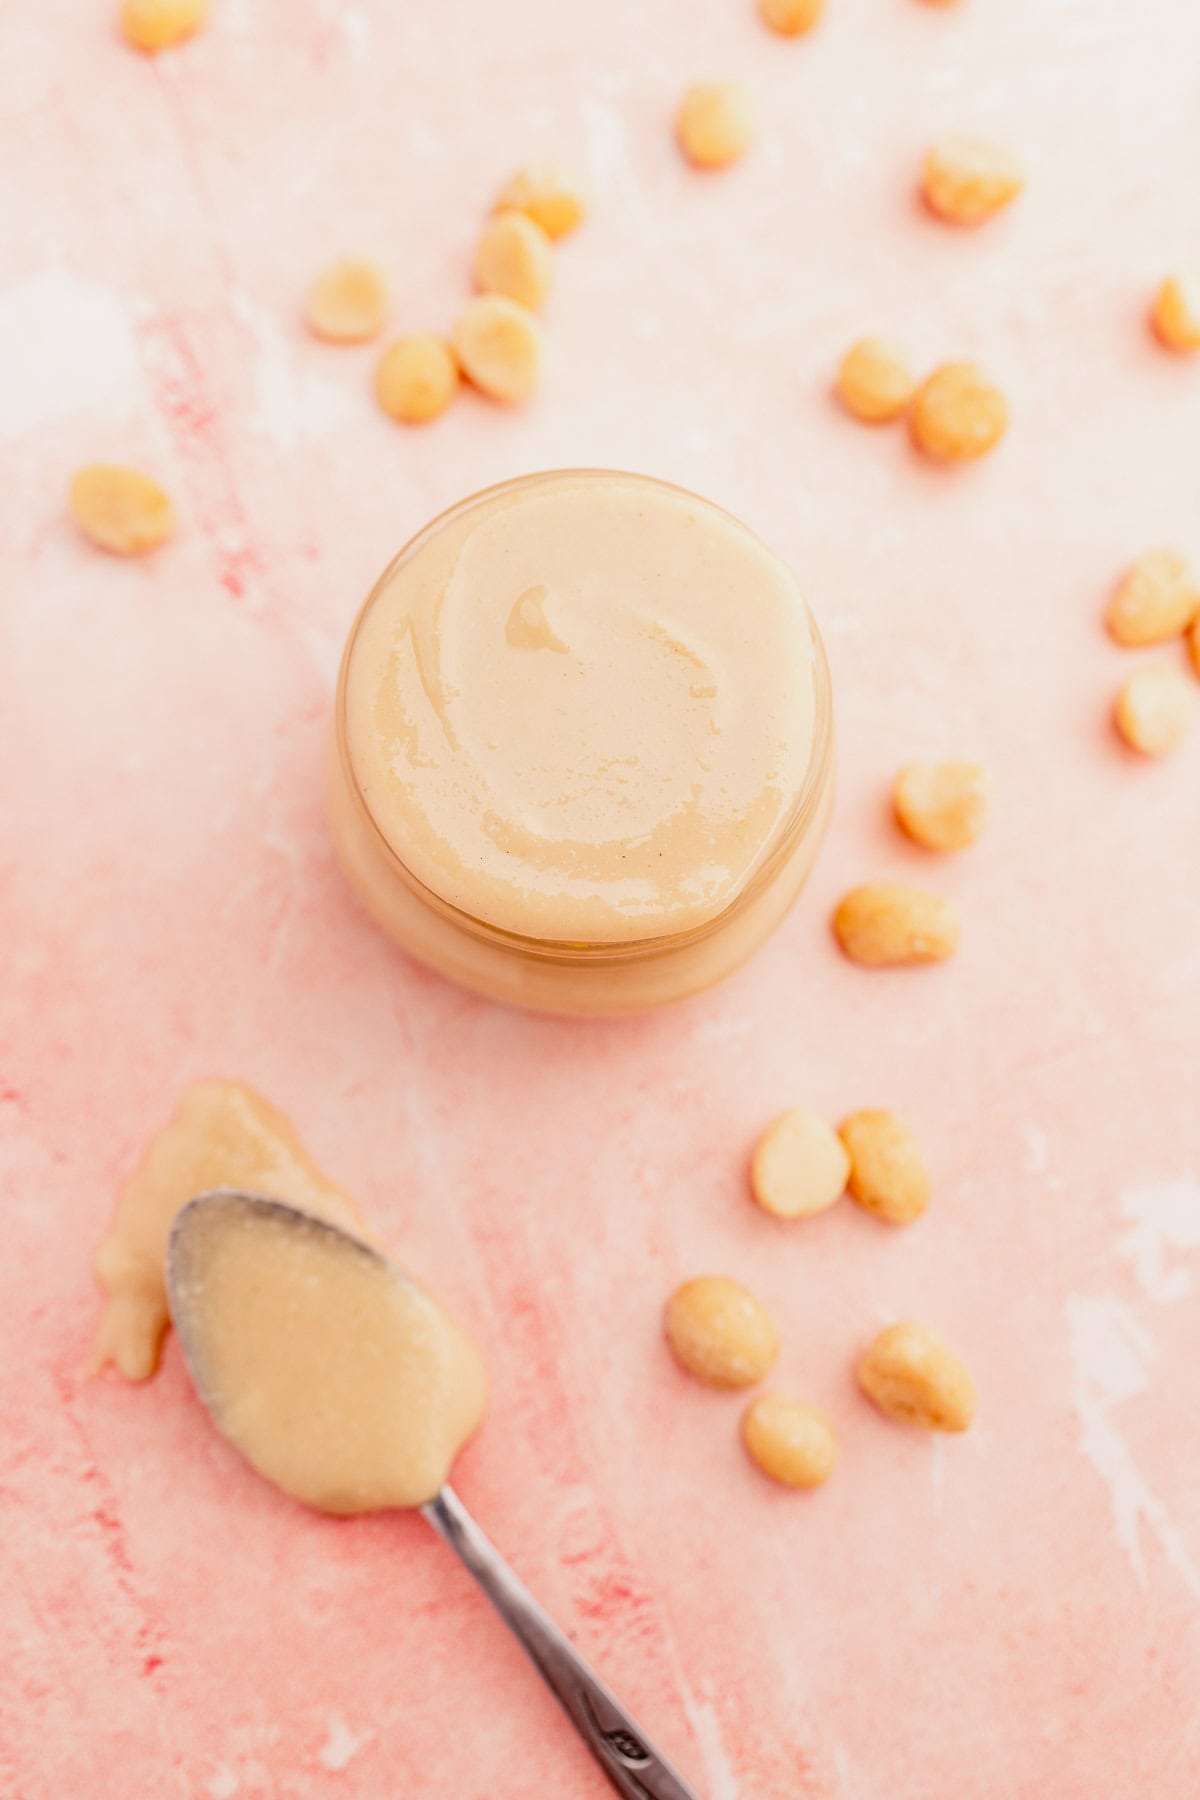 Glass jar of creamy macadamia nut butter with a spoon and spilt nuts on a pink surface.